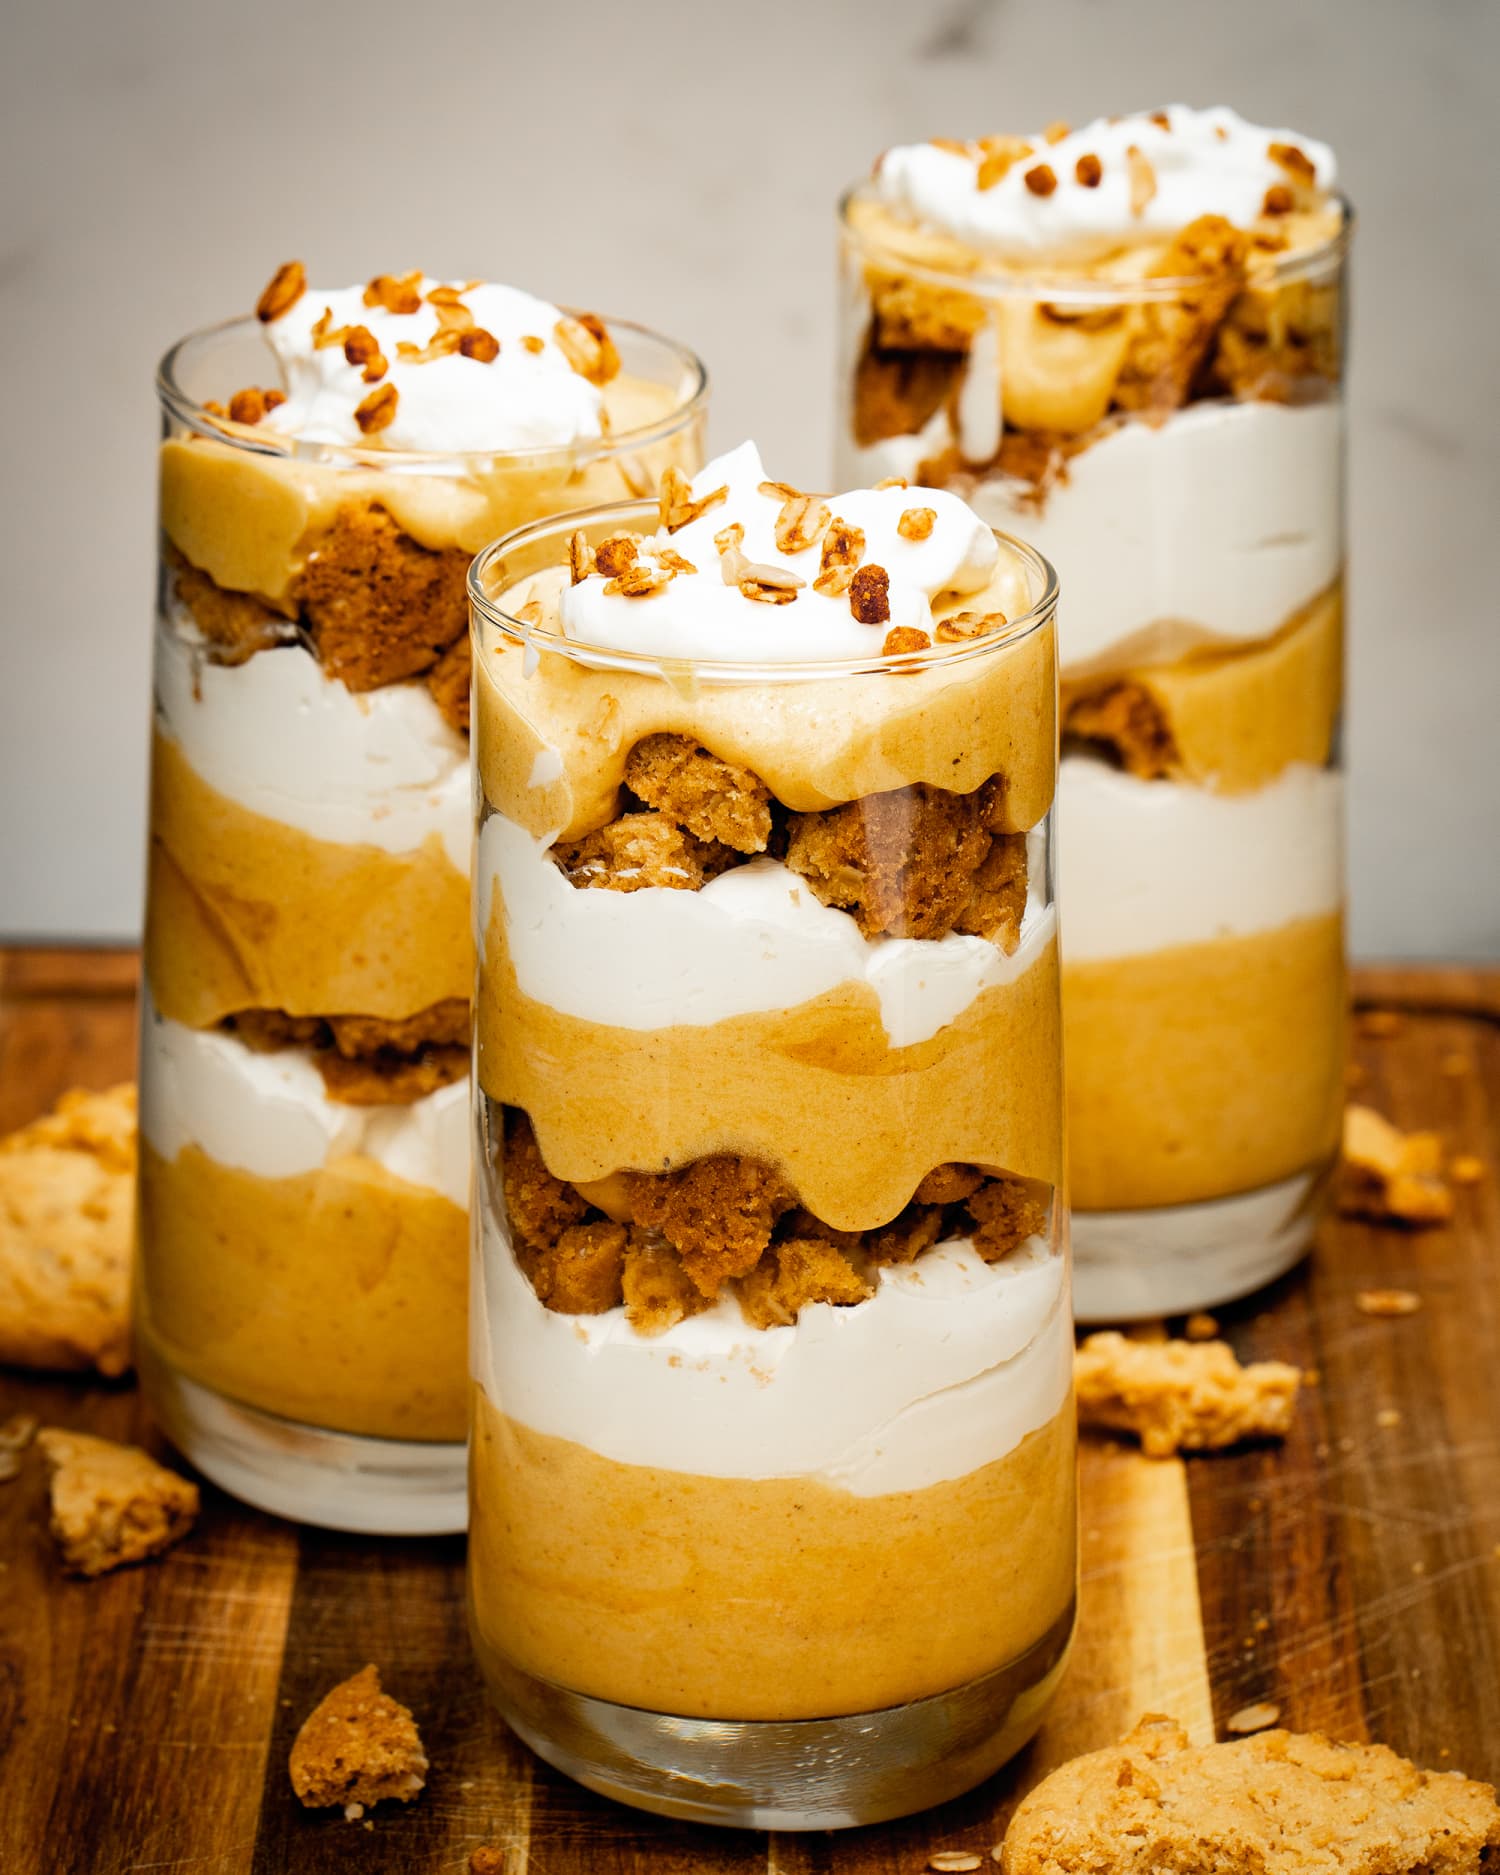 I Tried Ina Garten’s Pumpkin Mousse Parfait Recipe and It Changed the Way I Feel About Parfaits